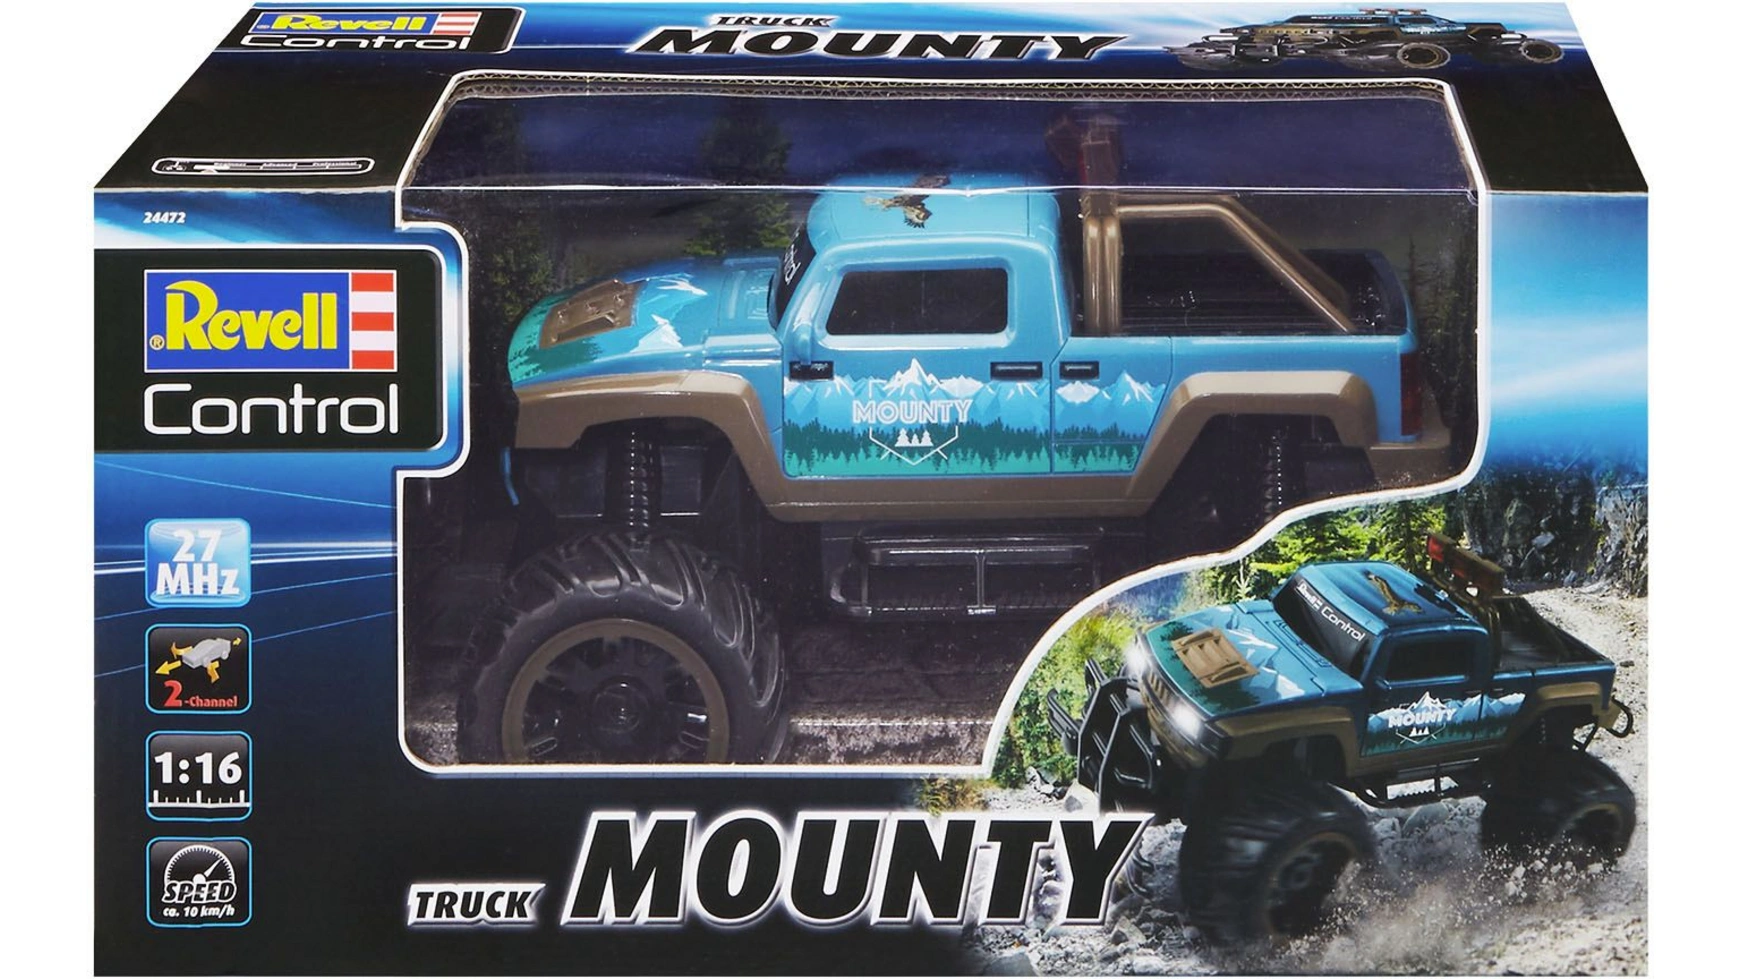 Revell Control RC Truck MOUNTY austar 2 4 4ch radio remote control rc transmitter with ax6s receiver for rc car off road vehicle boat rc truck model